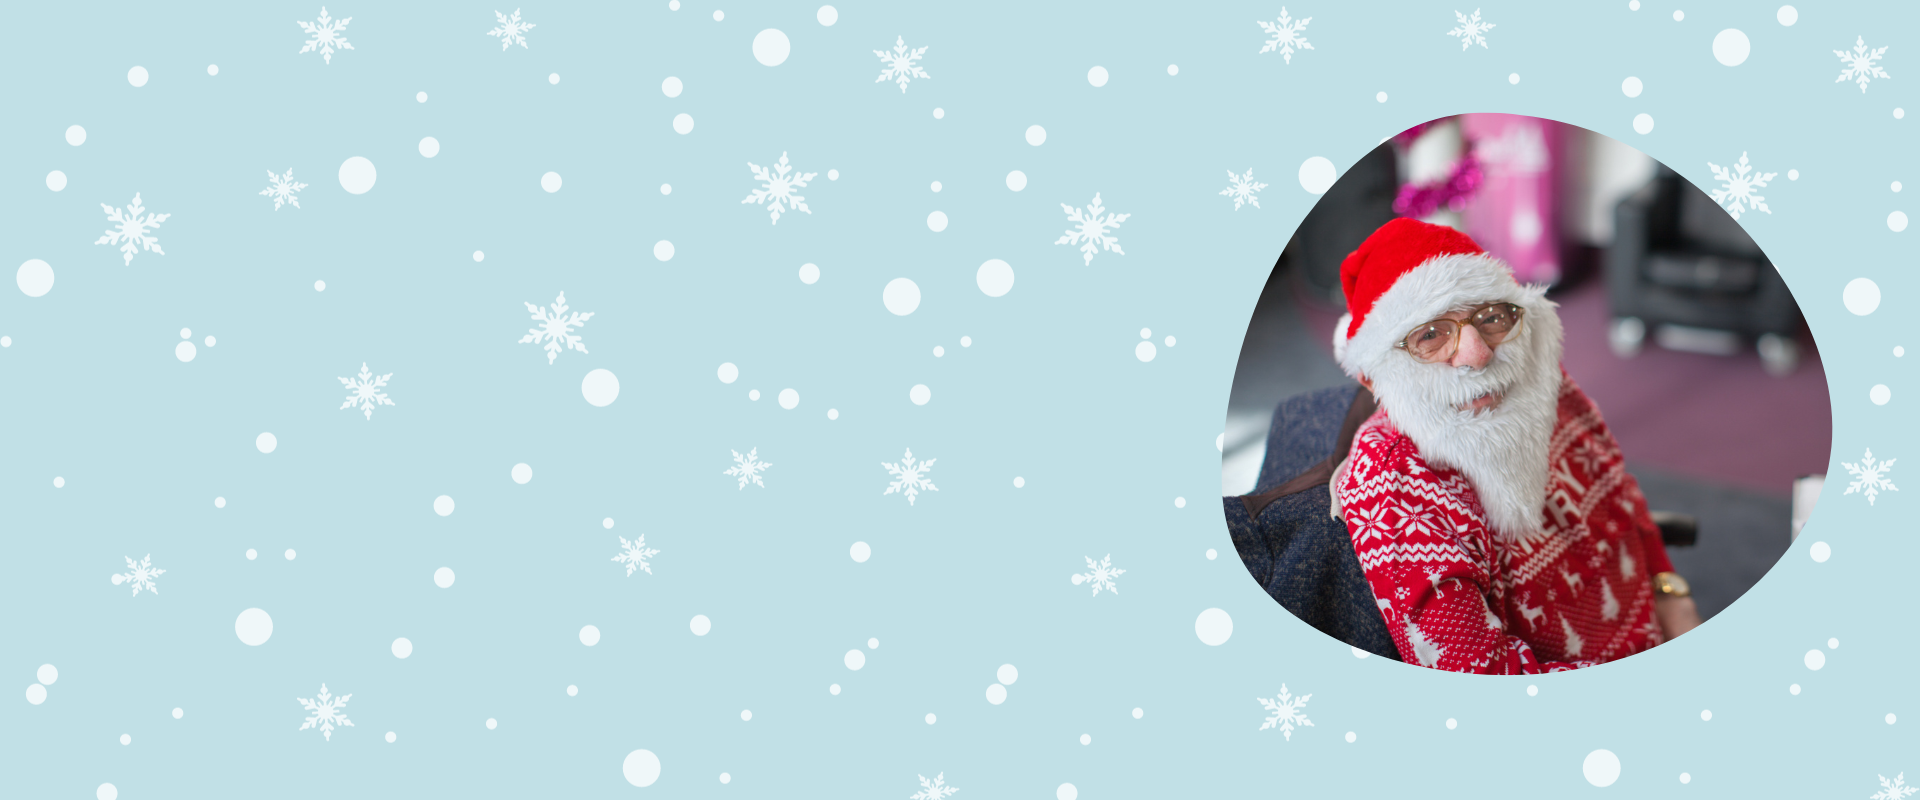 Graphic image with sky blue background and white snowflakes. On the right is a bubble with an image of a disabled man wearing a festive red jumper and a Santa hat.